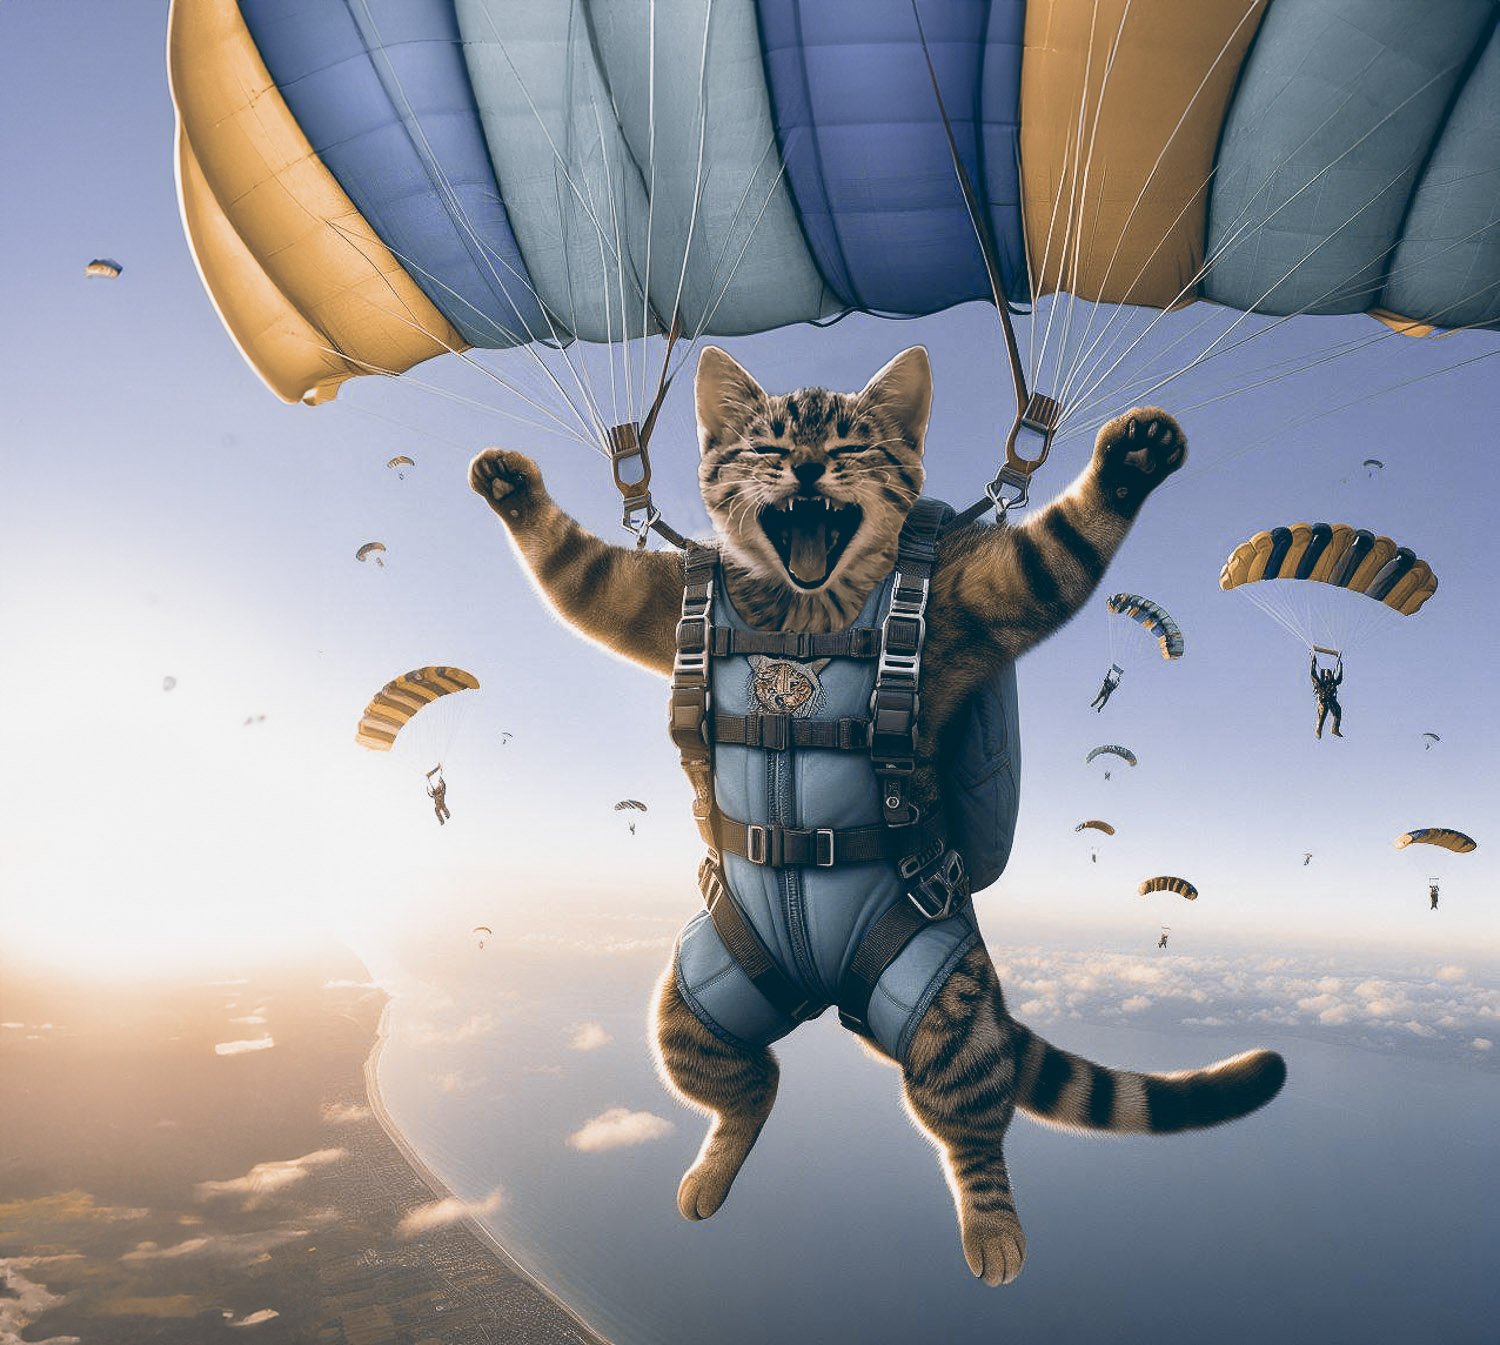 A small tabby cat parachuting high in the sky with it's mouth wide open in a look of exhilaration